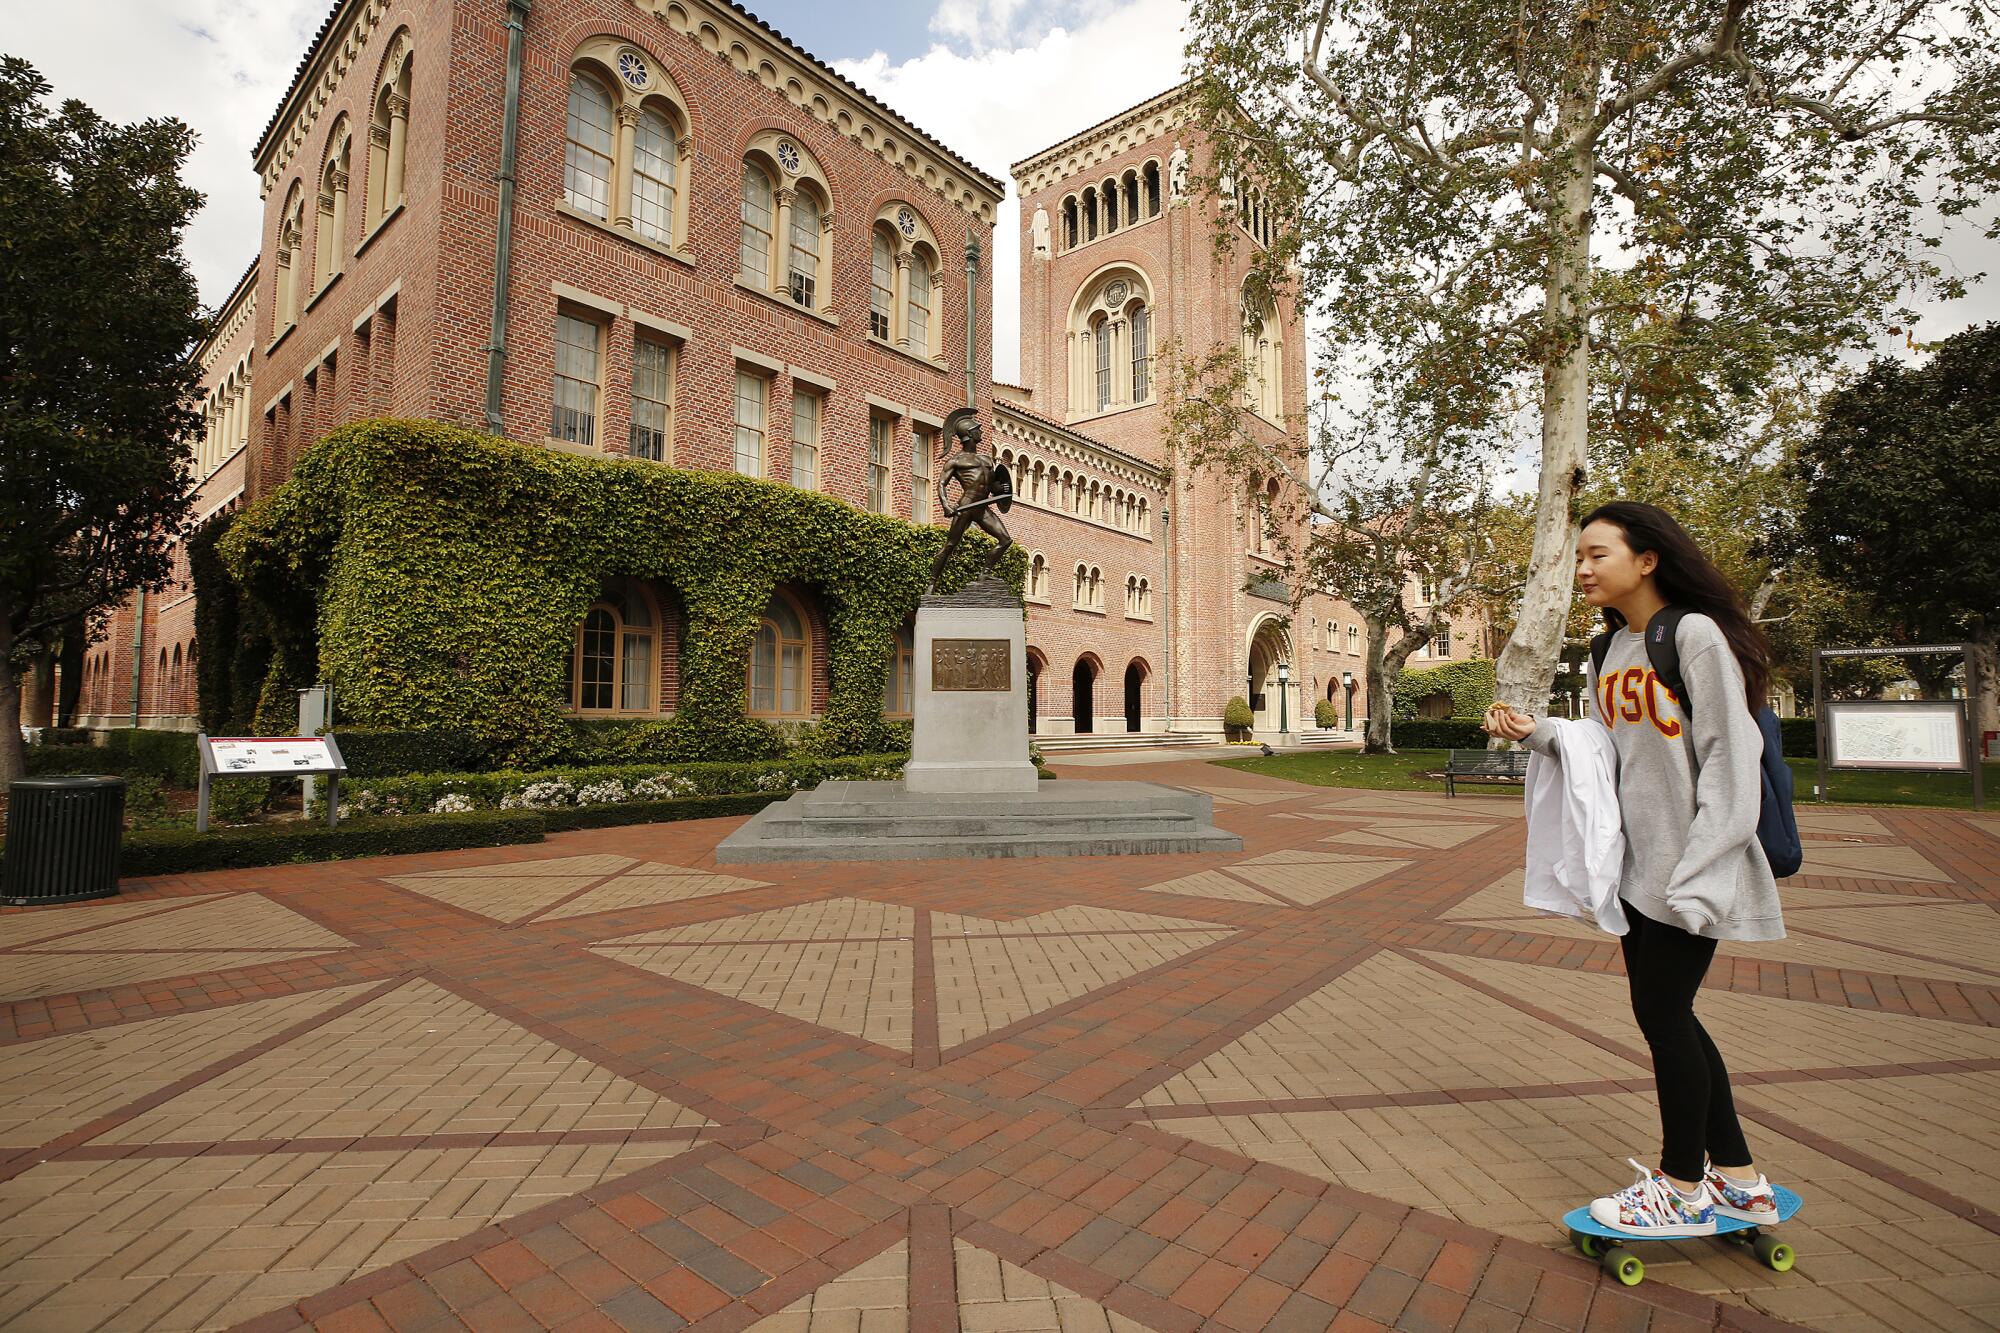 The USC campus near downtown Los Angeles was quiet Wednesday as classes are being held online for the first day